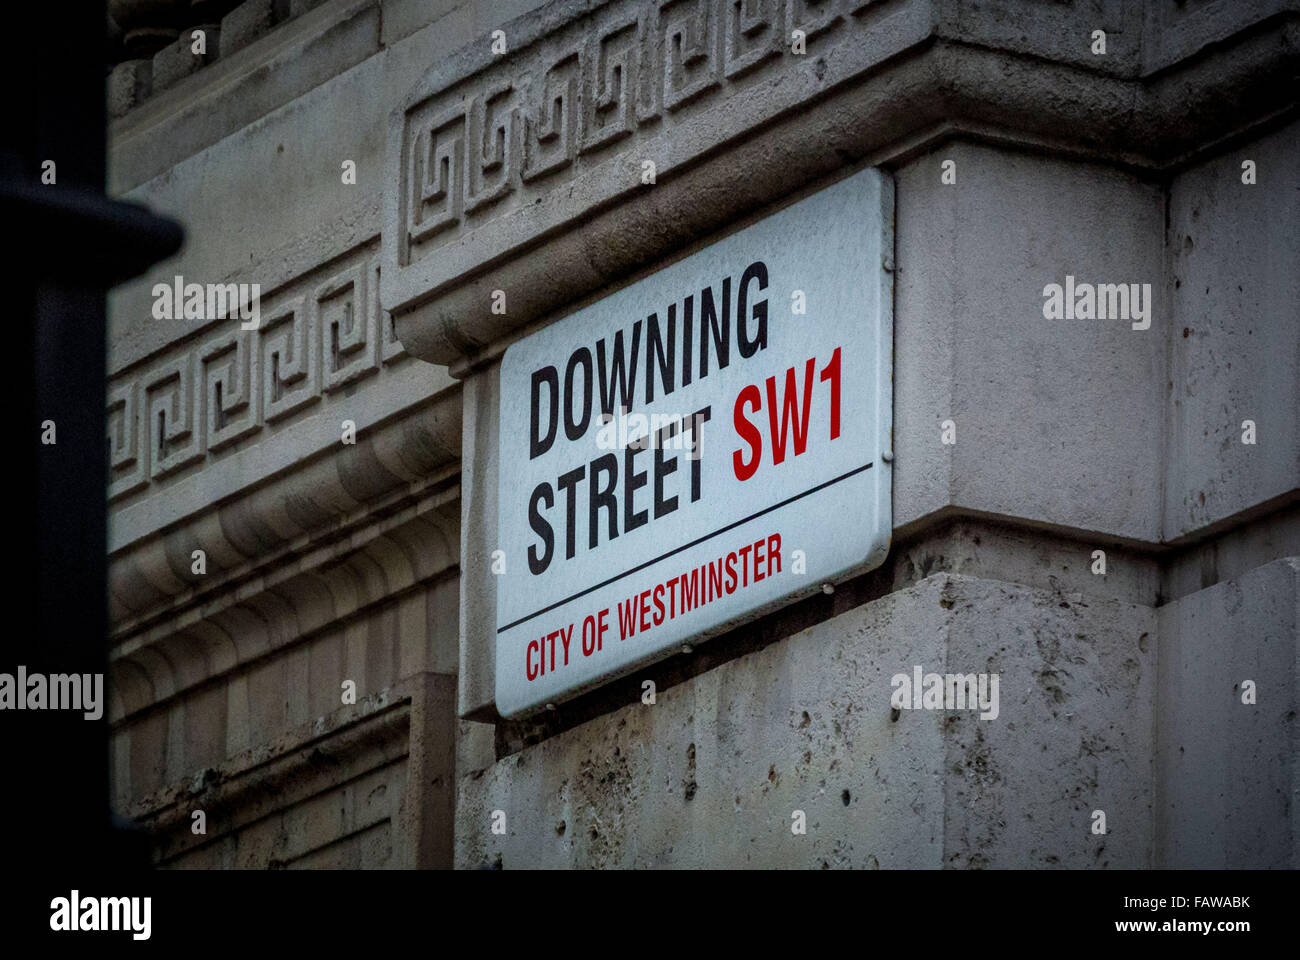 Downing Street SW1, City of Westminster, segno in Londra, Regno Unito. Foto Stock